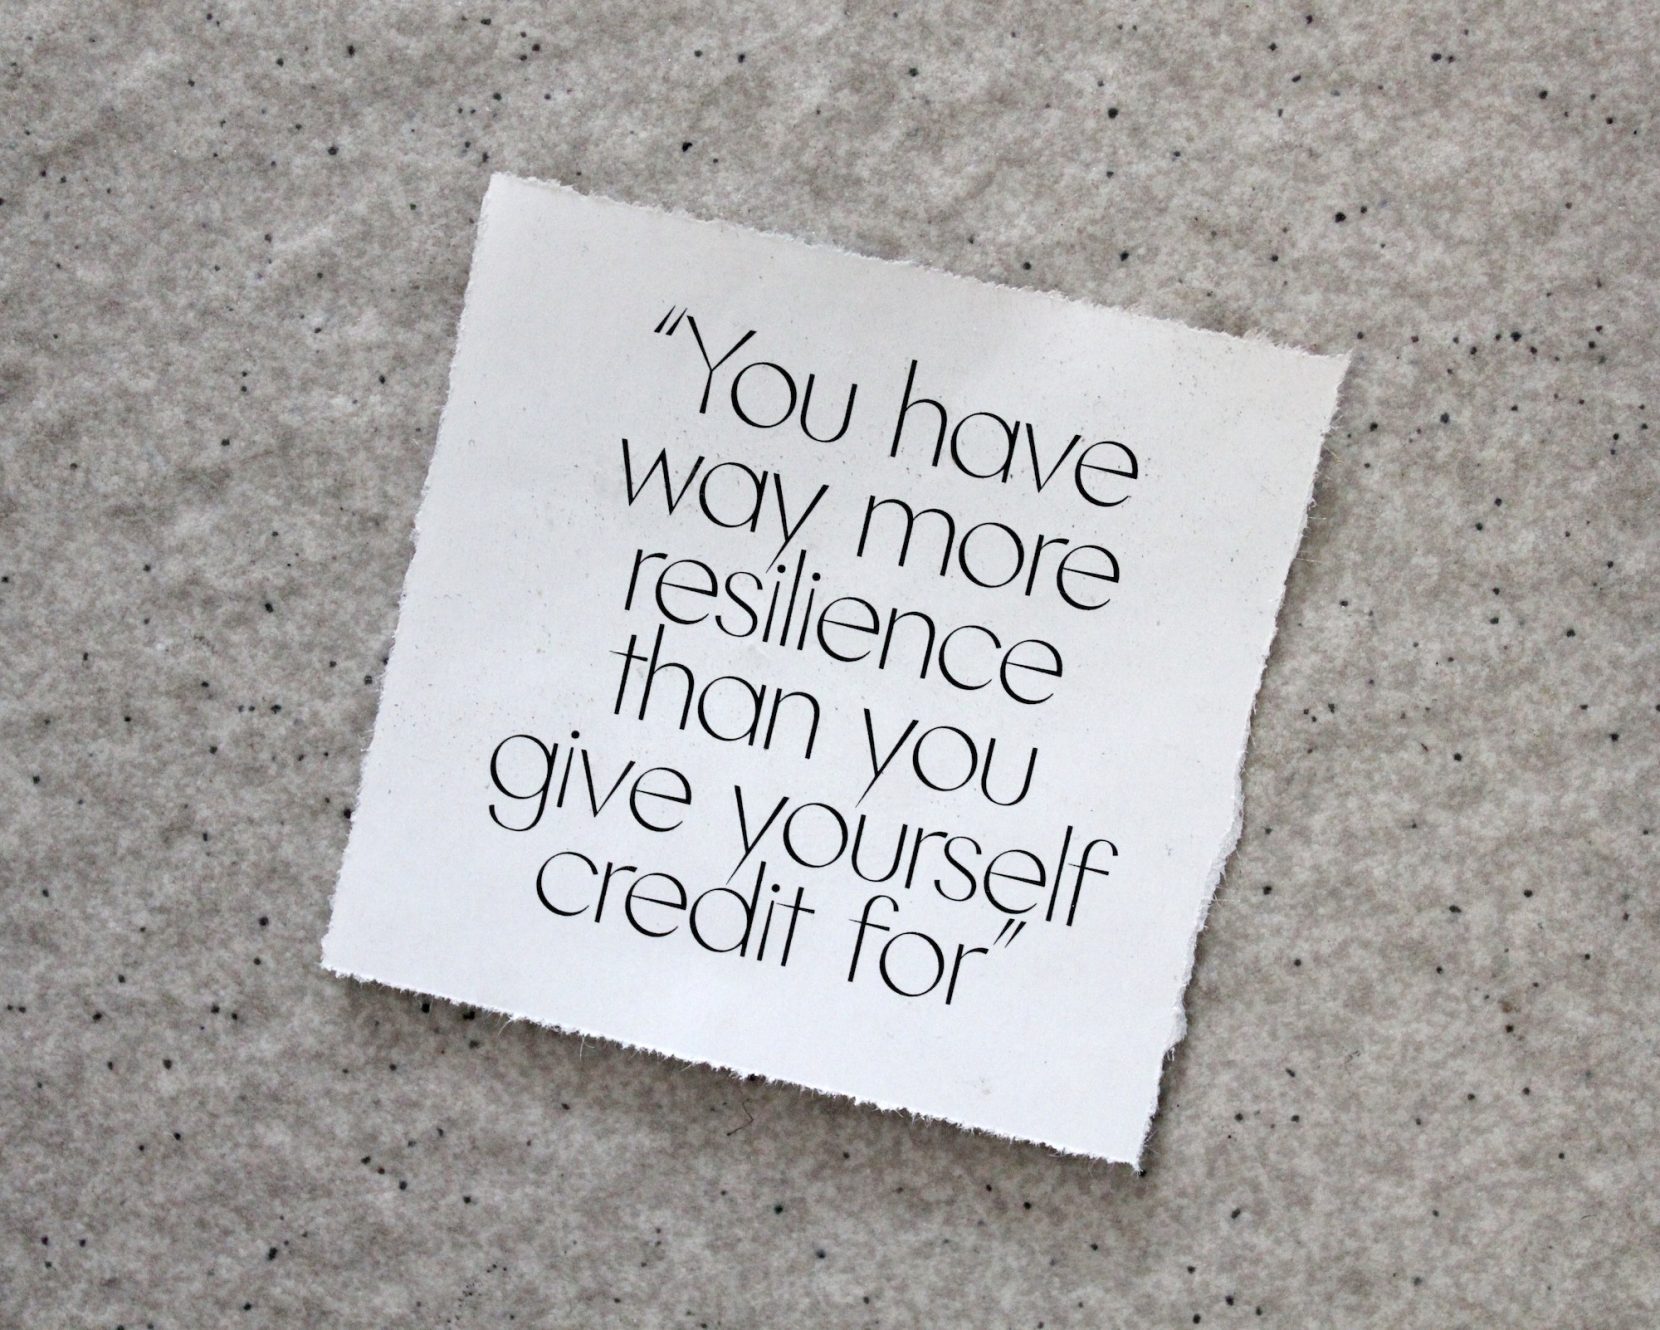 The Importance of Resilience